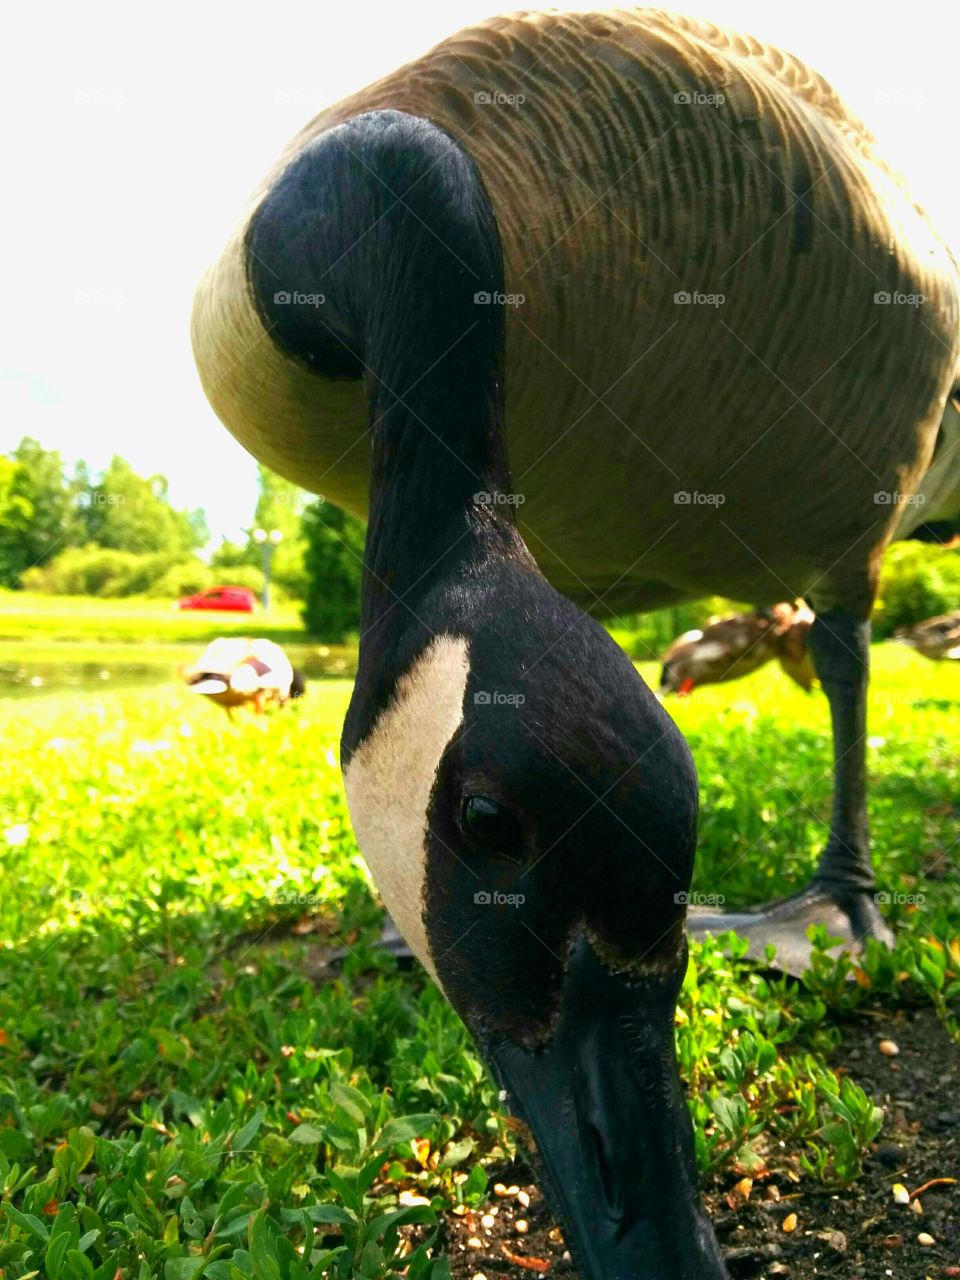 Close up goose eating. Goose let me get really close to take picture while he was eating